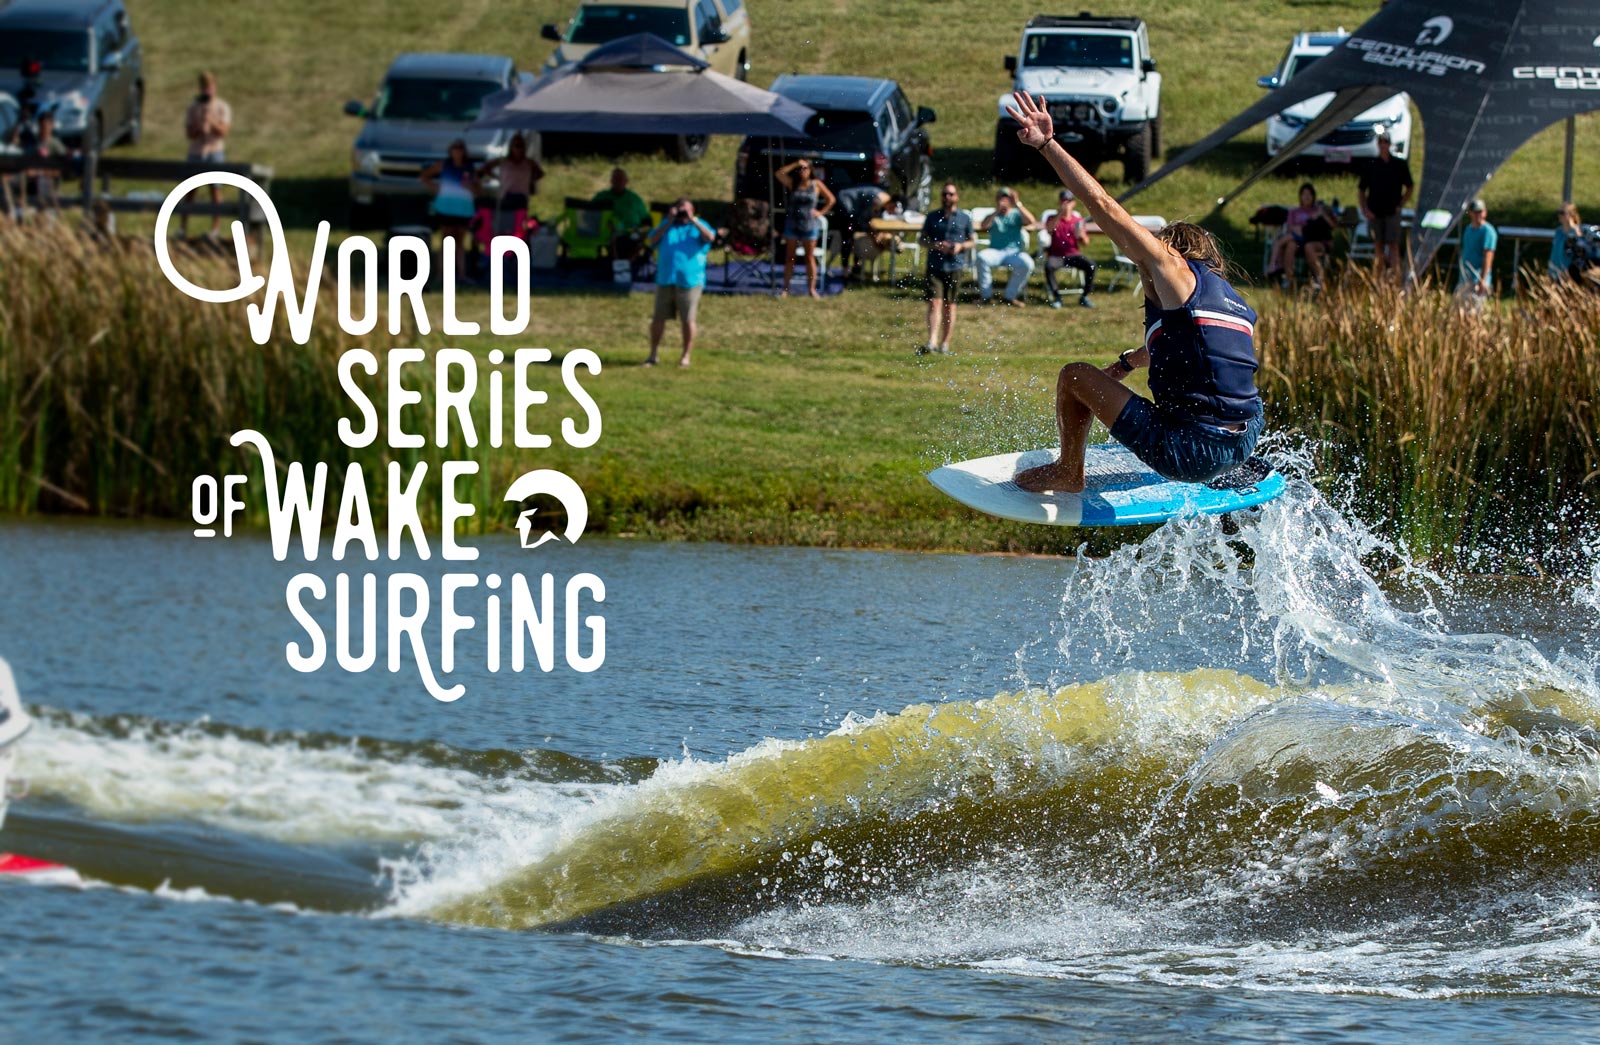 The World Series of wake surfing is an exhilarating competition that attracts surfers and fans from all around the globe.